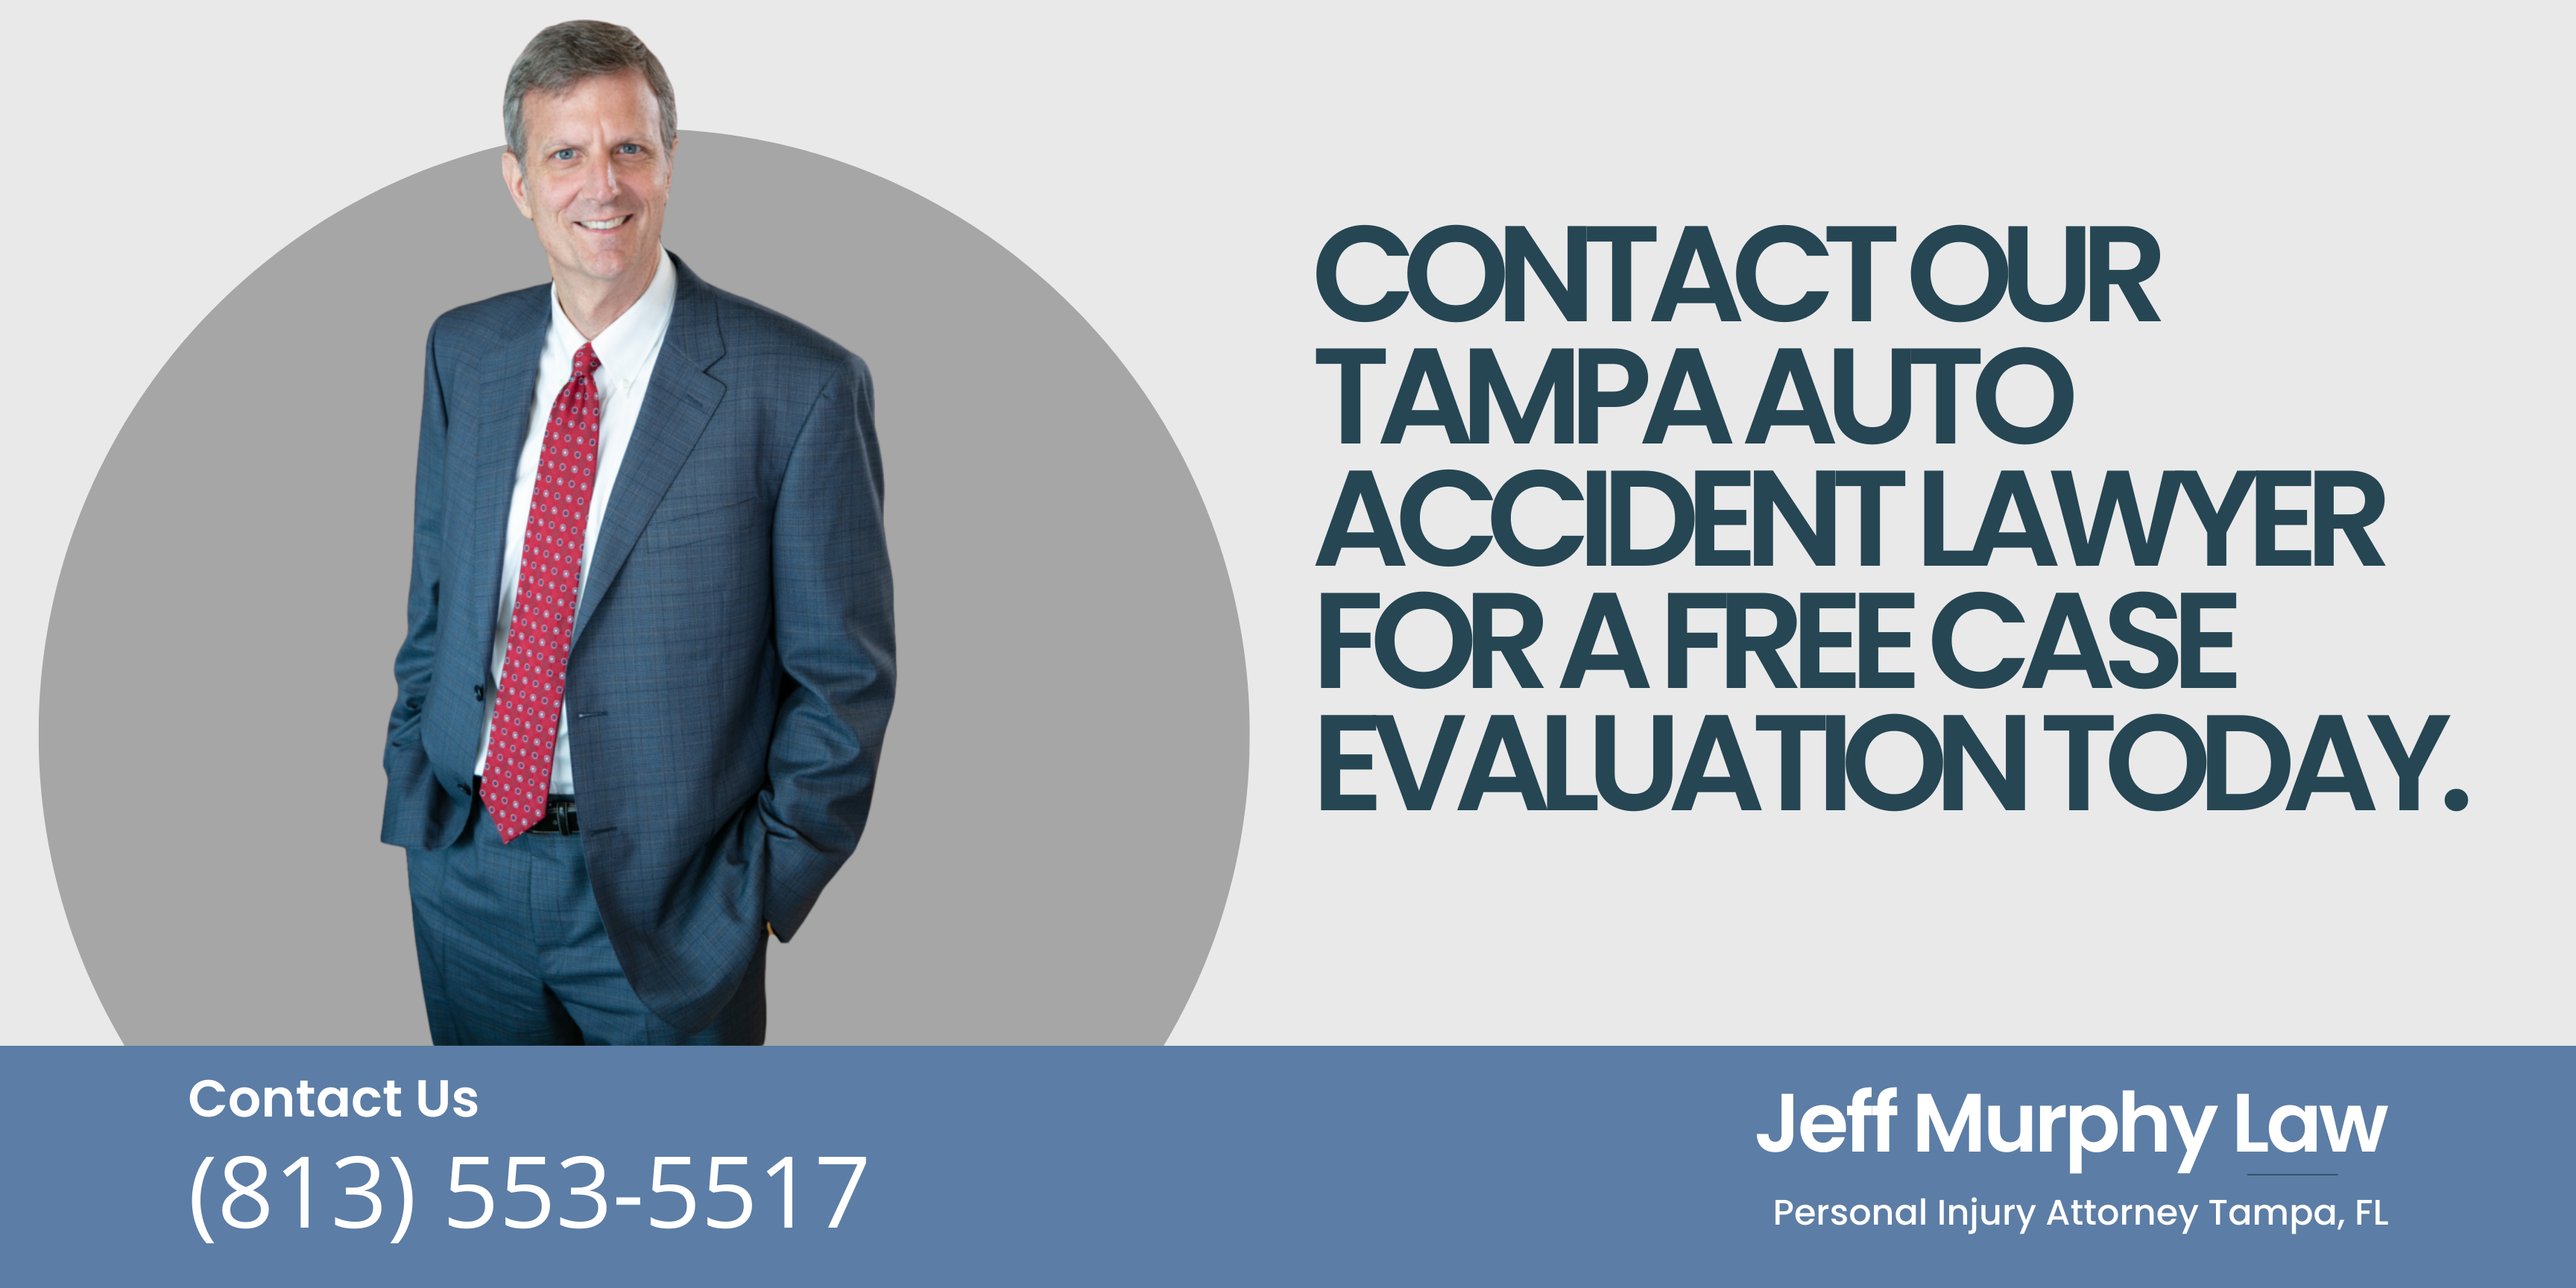 Contact our Tampa Auto Accident Lawyer